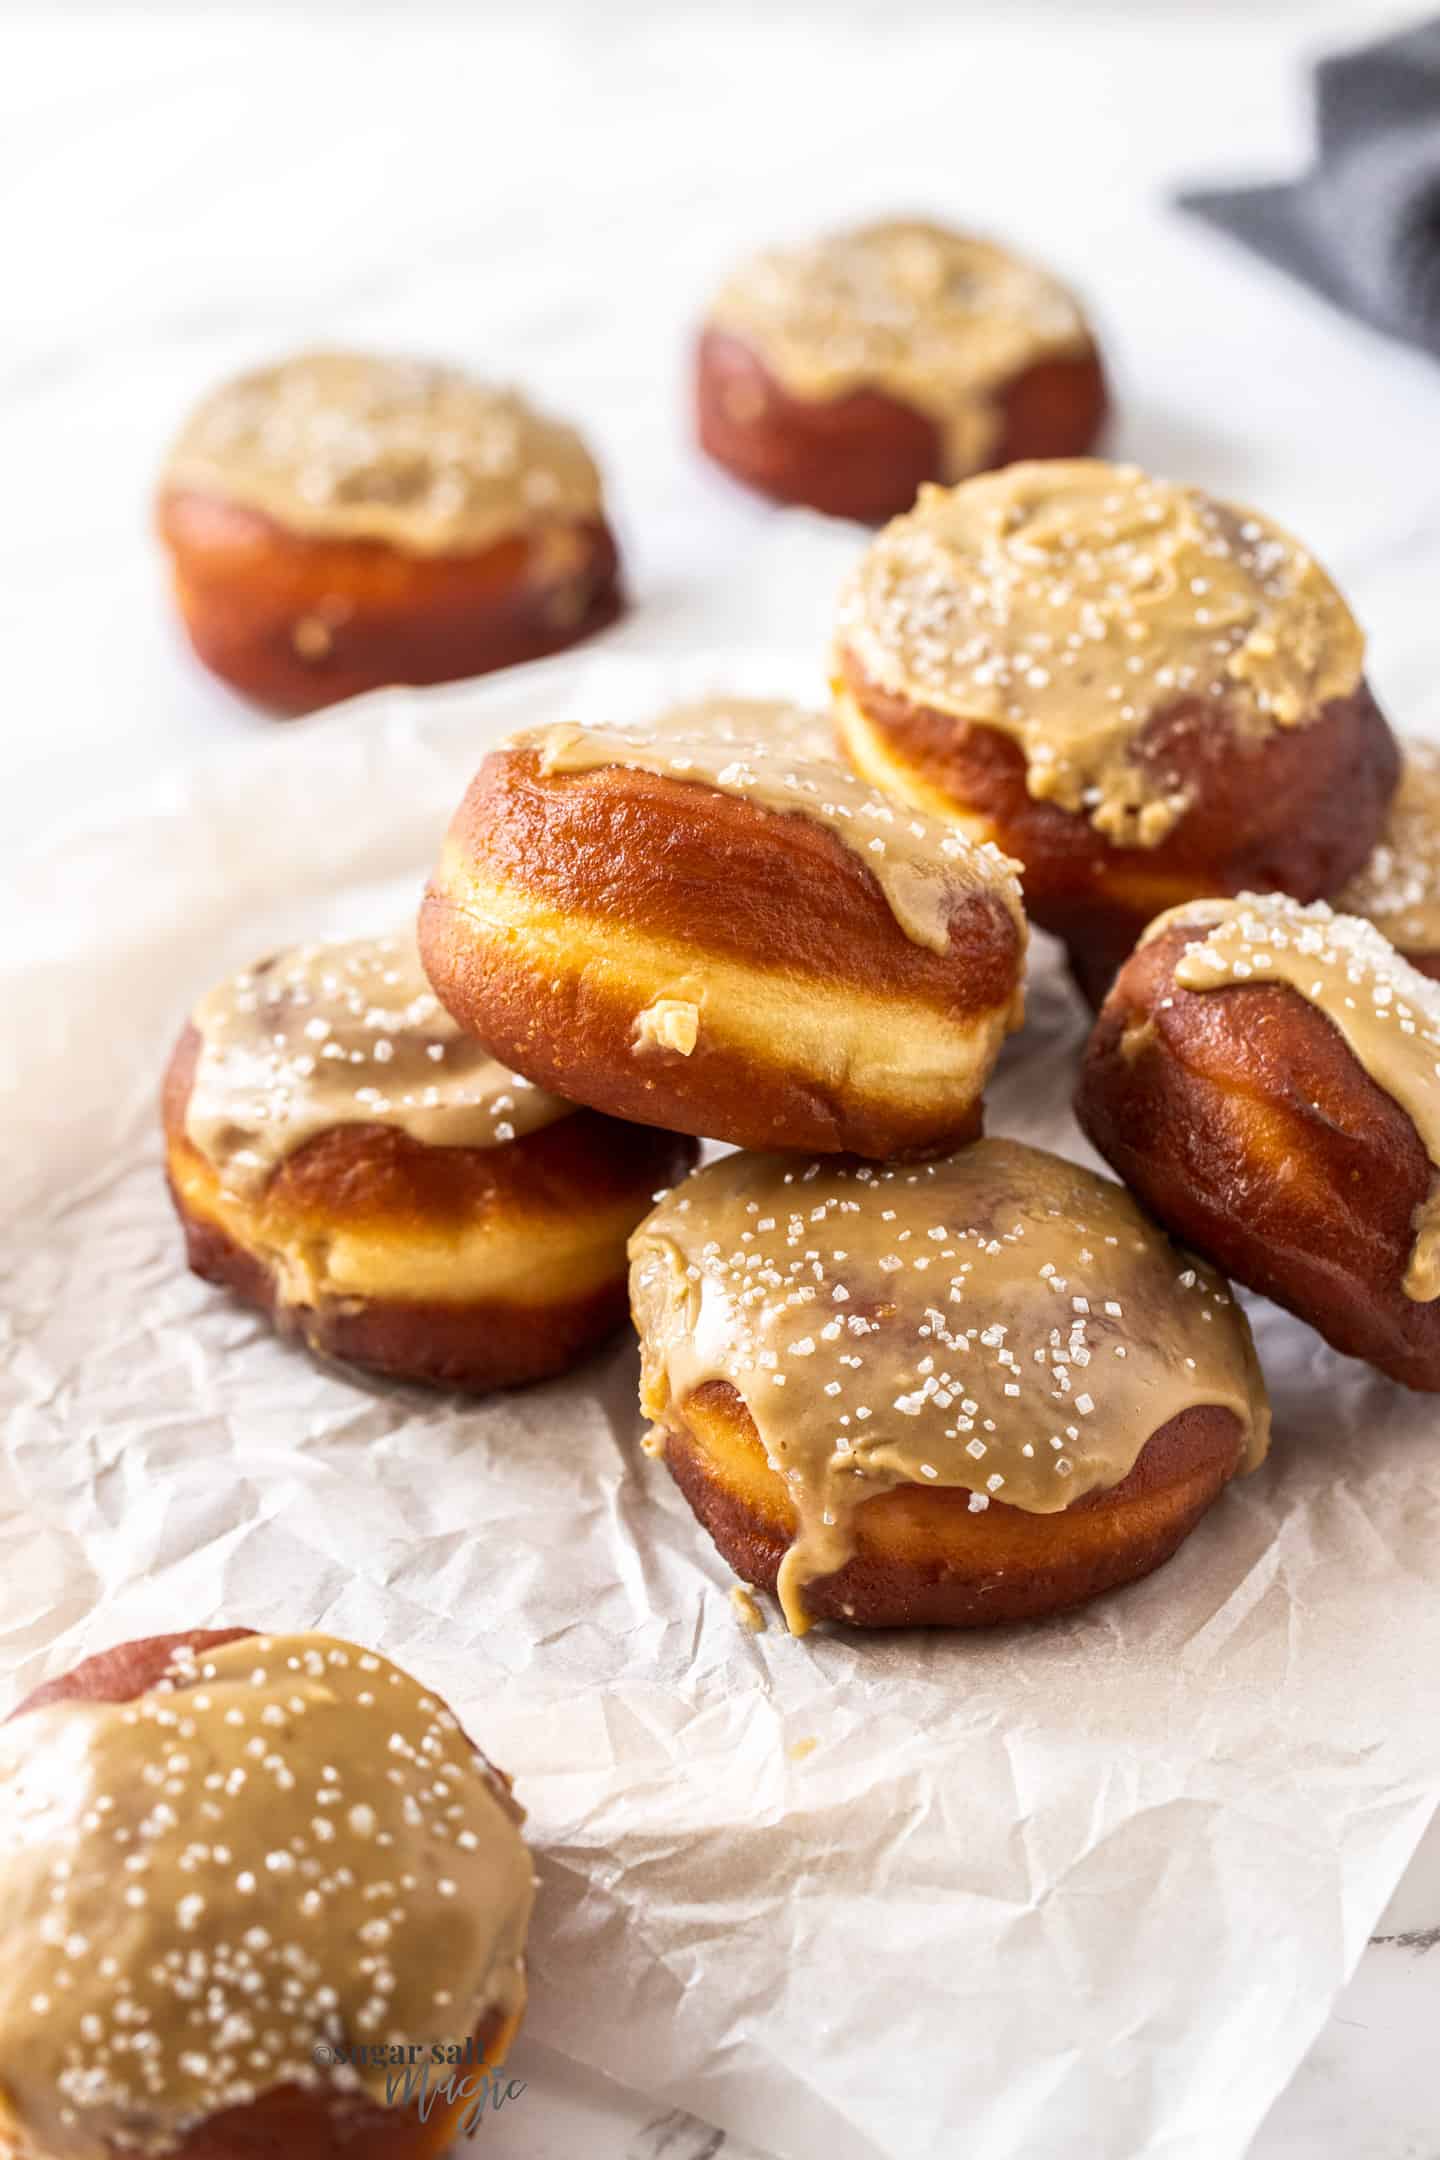 A pile of doughnuts topped with caramel icing on a sheet of baking paper.